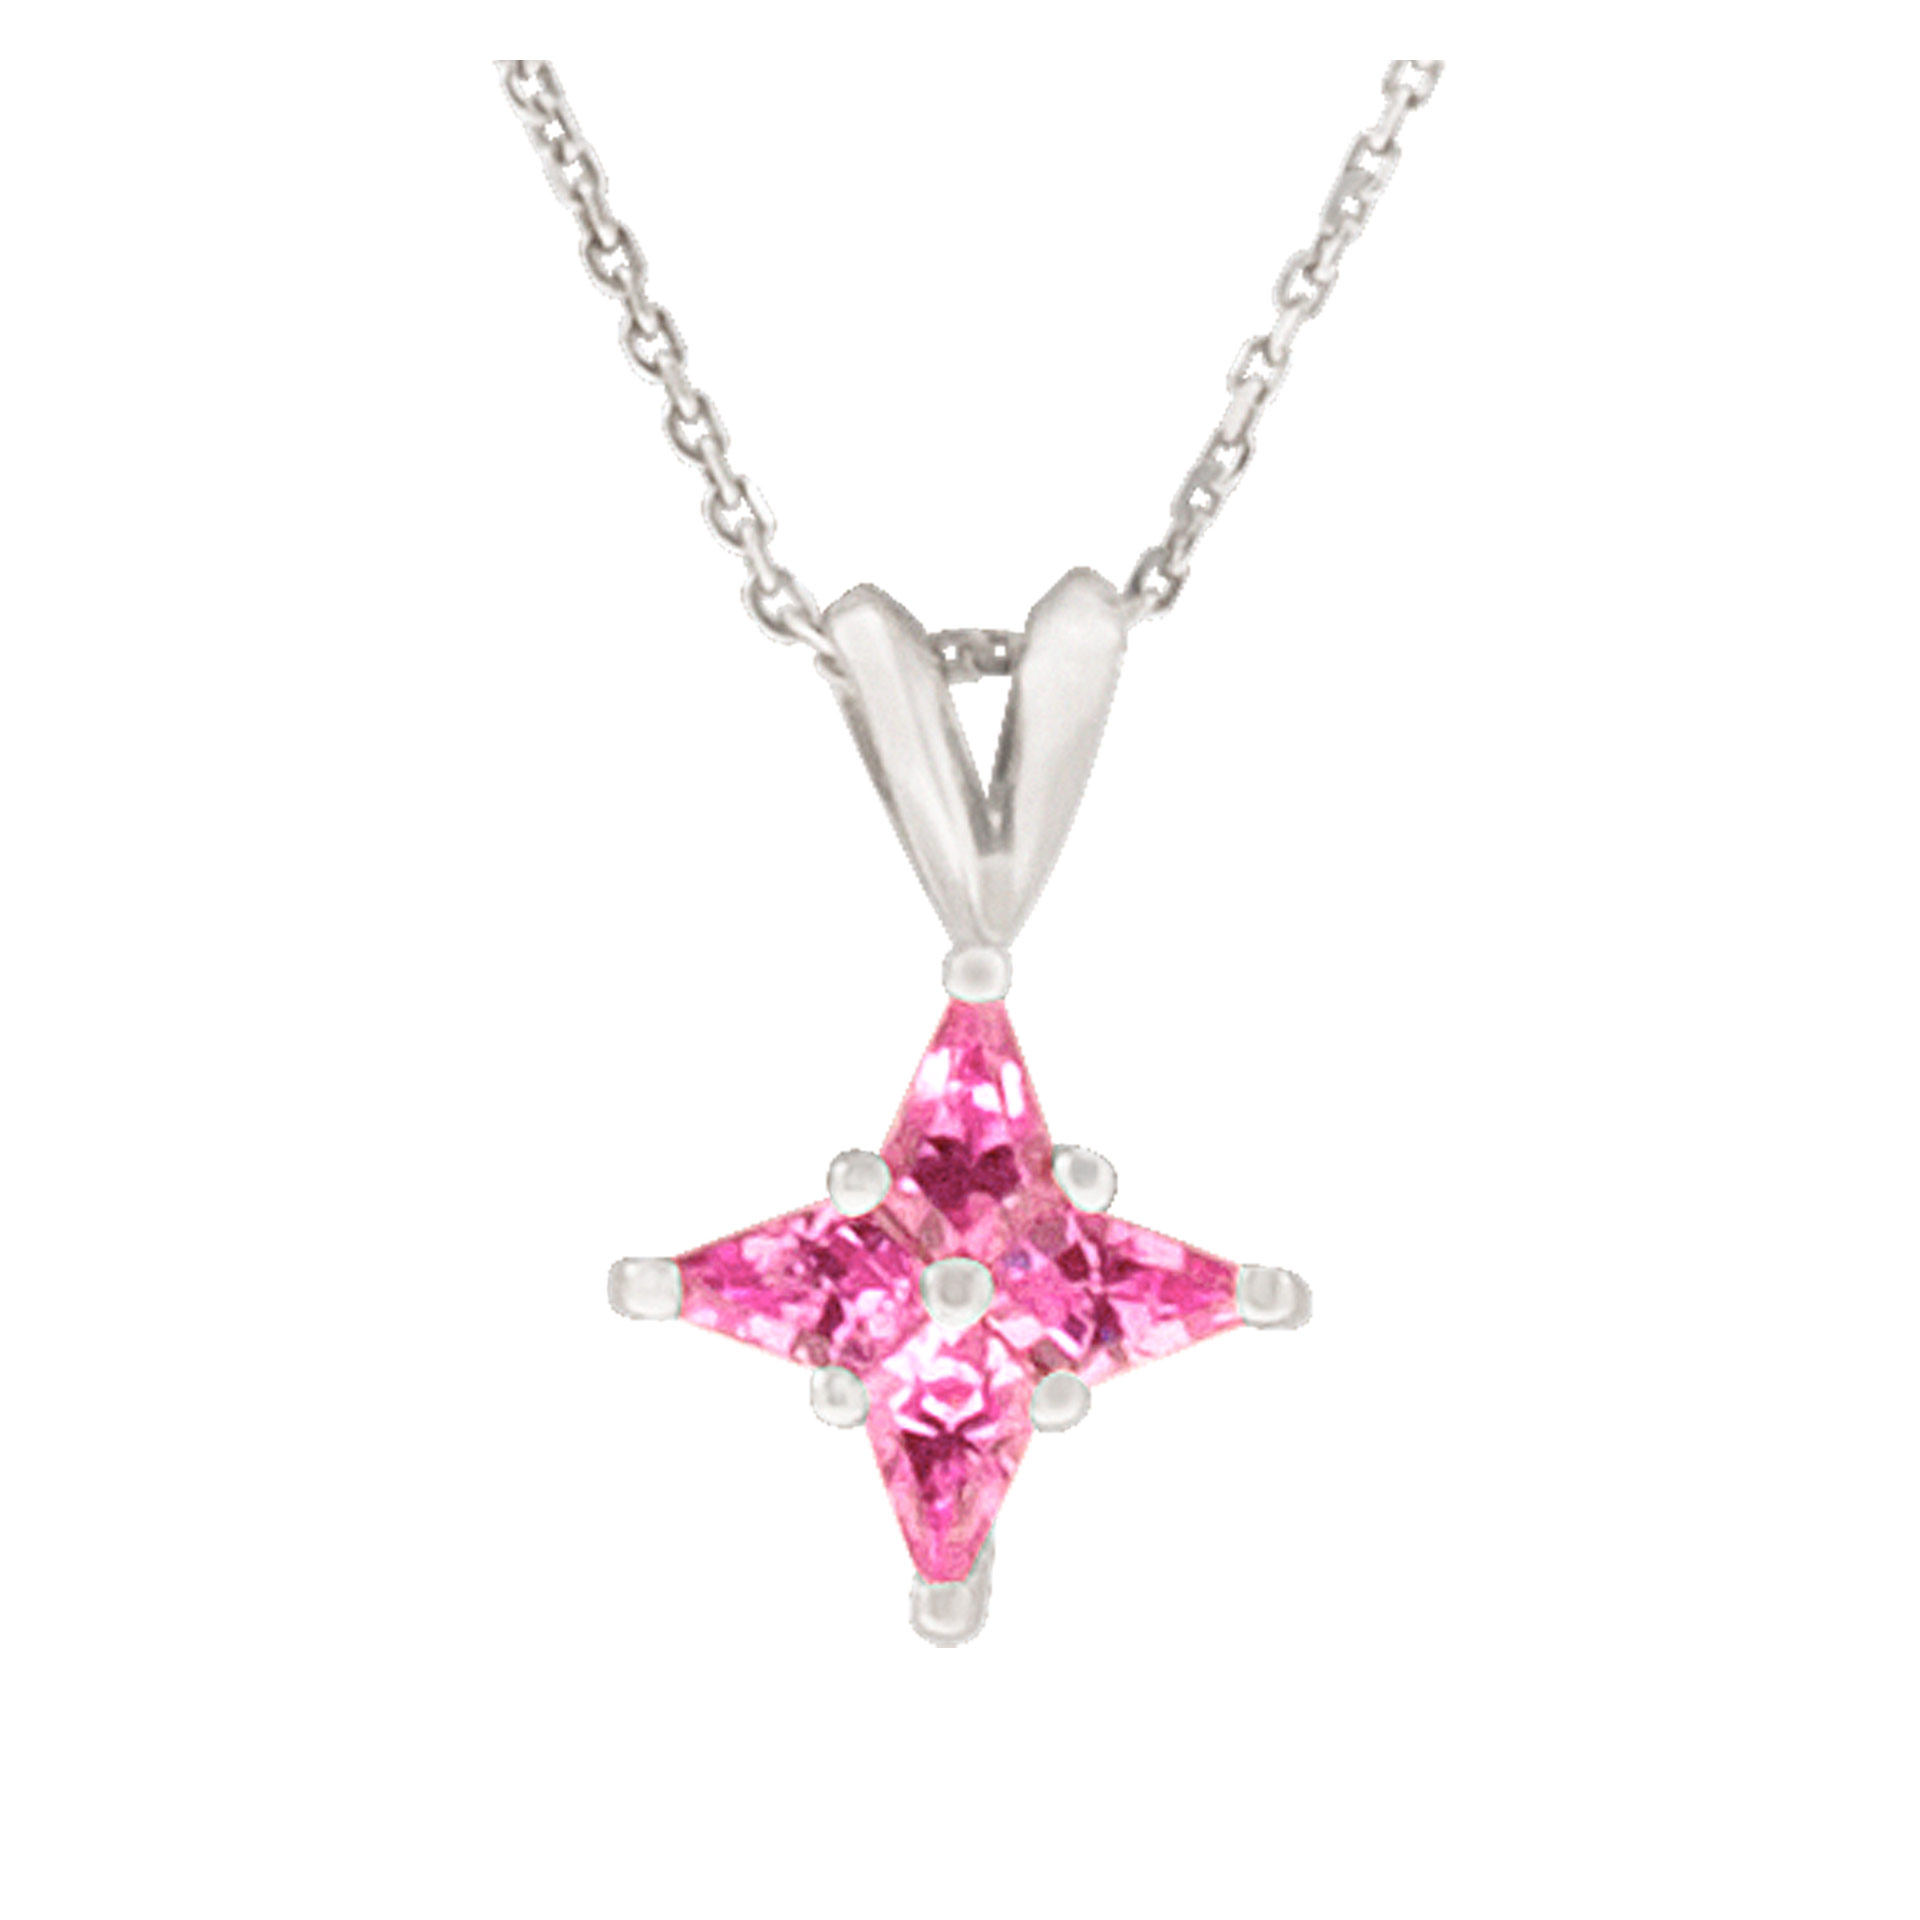 Pink star/flower necklace in 18k white gold with chain